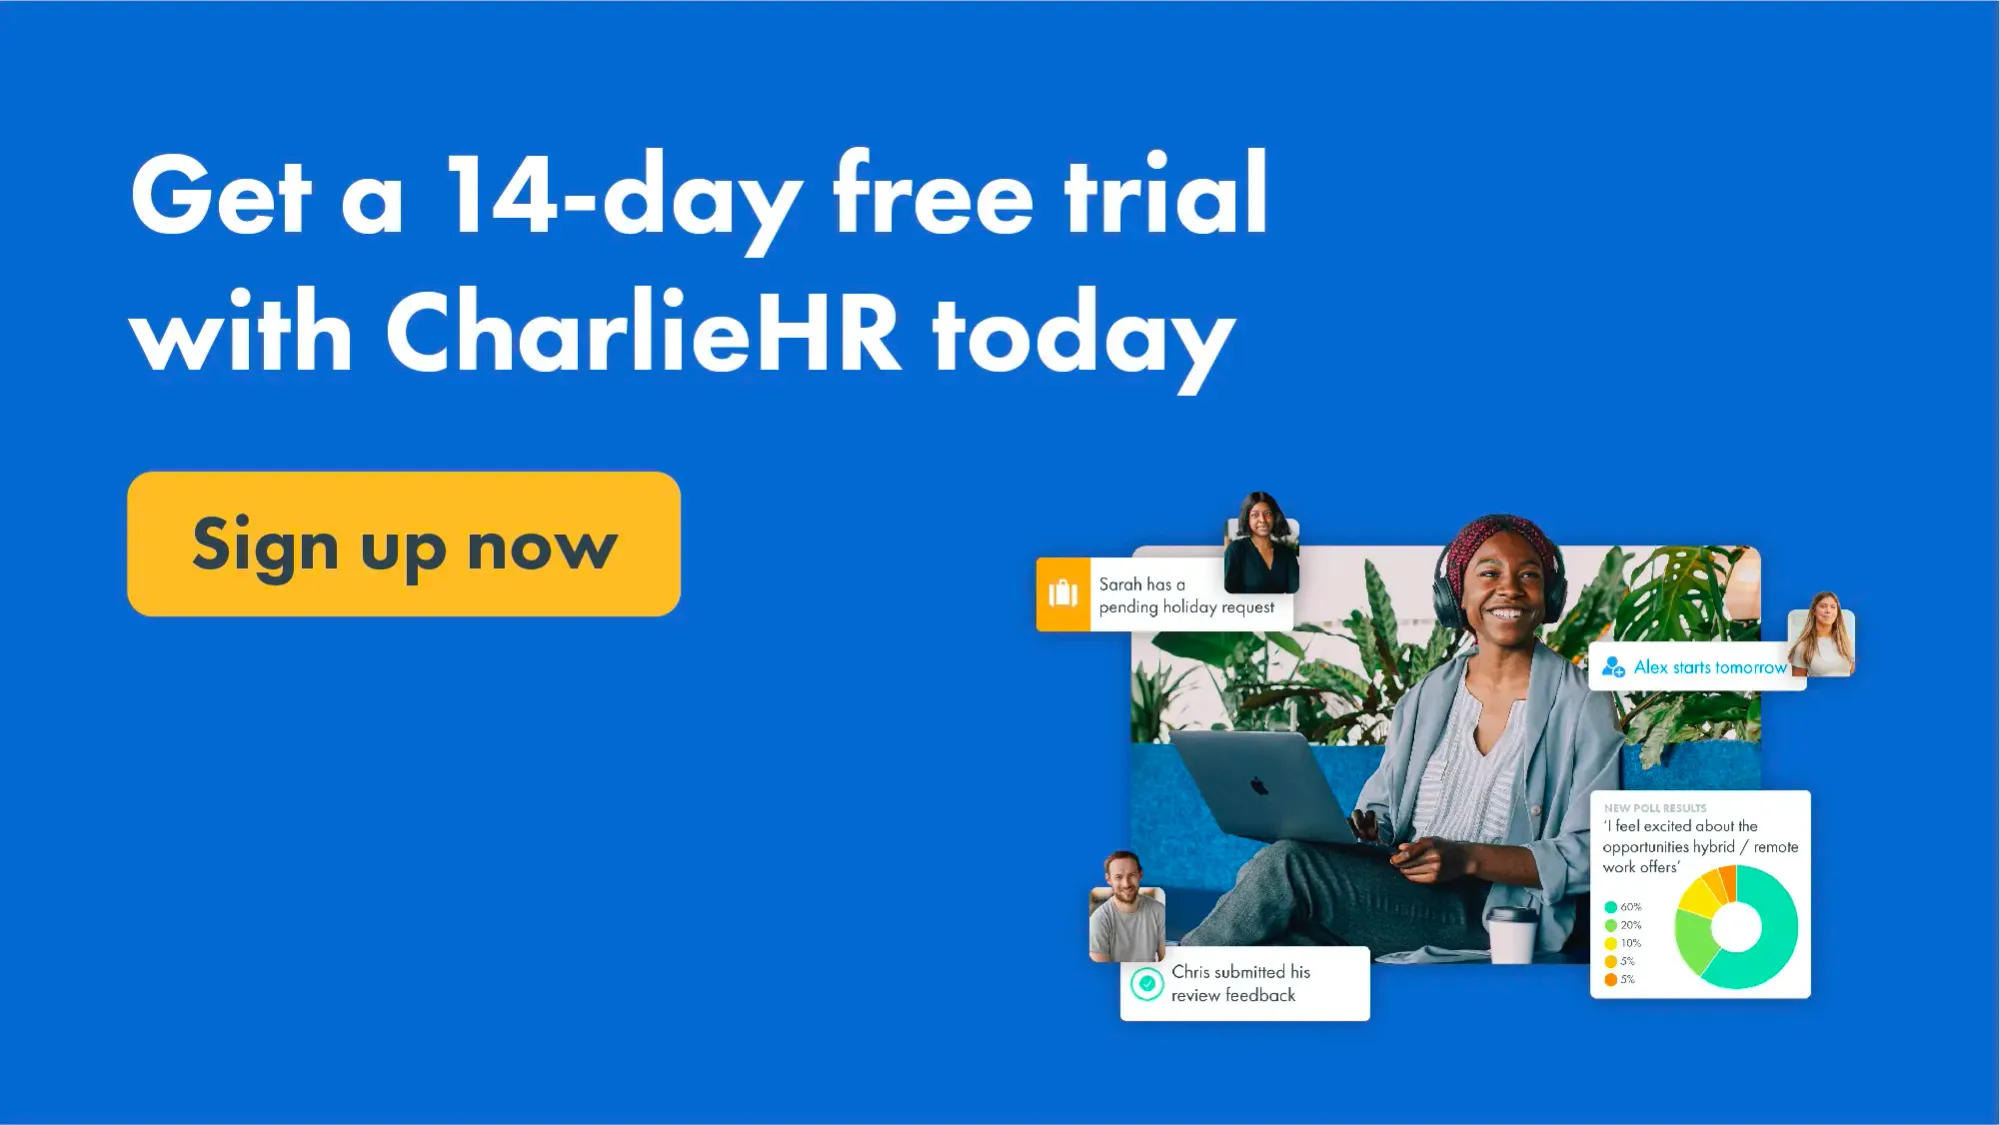 Click here to start a 14-day free trial of CharlieHR